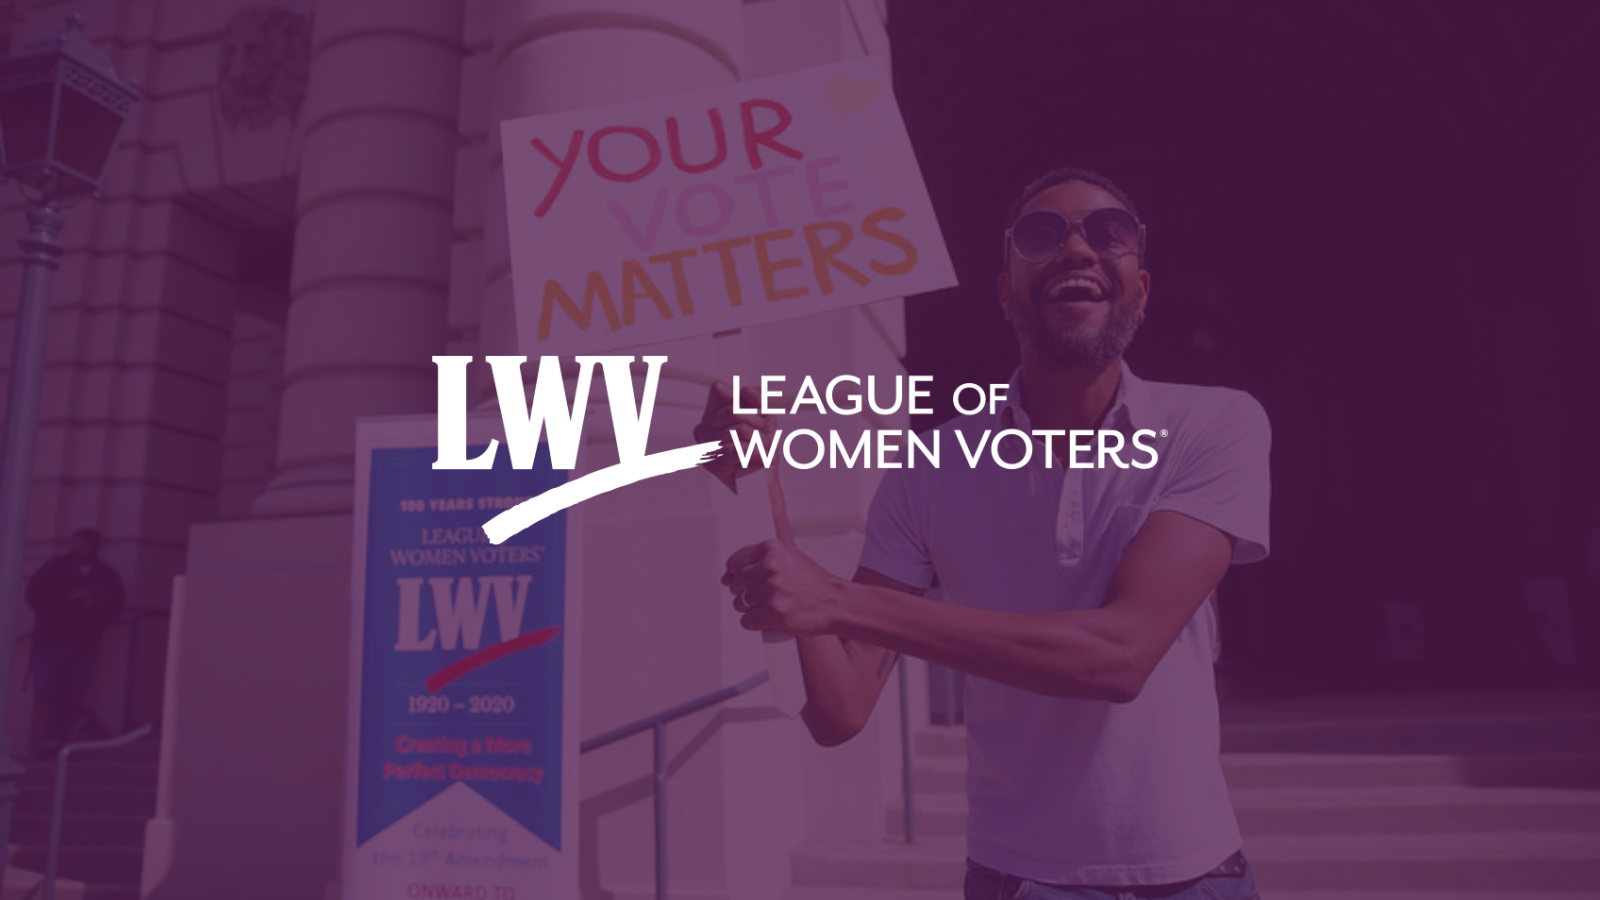 Image of a man holding a sign that says "your vote matters" with a purple overlay. The LWV logo is centered over the image.